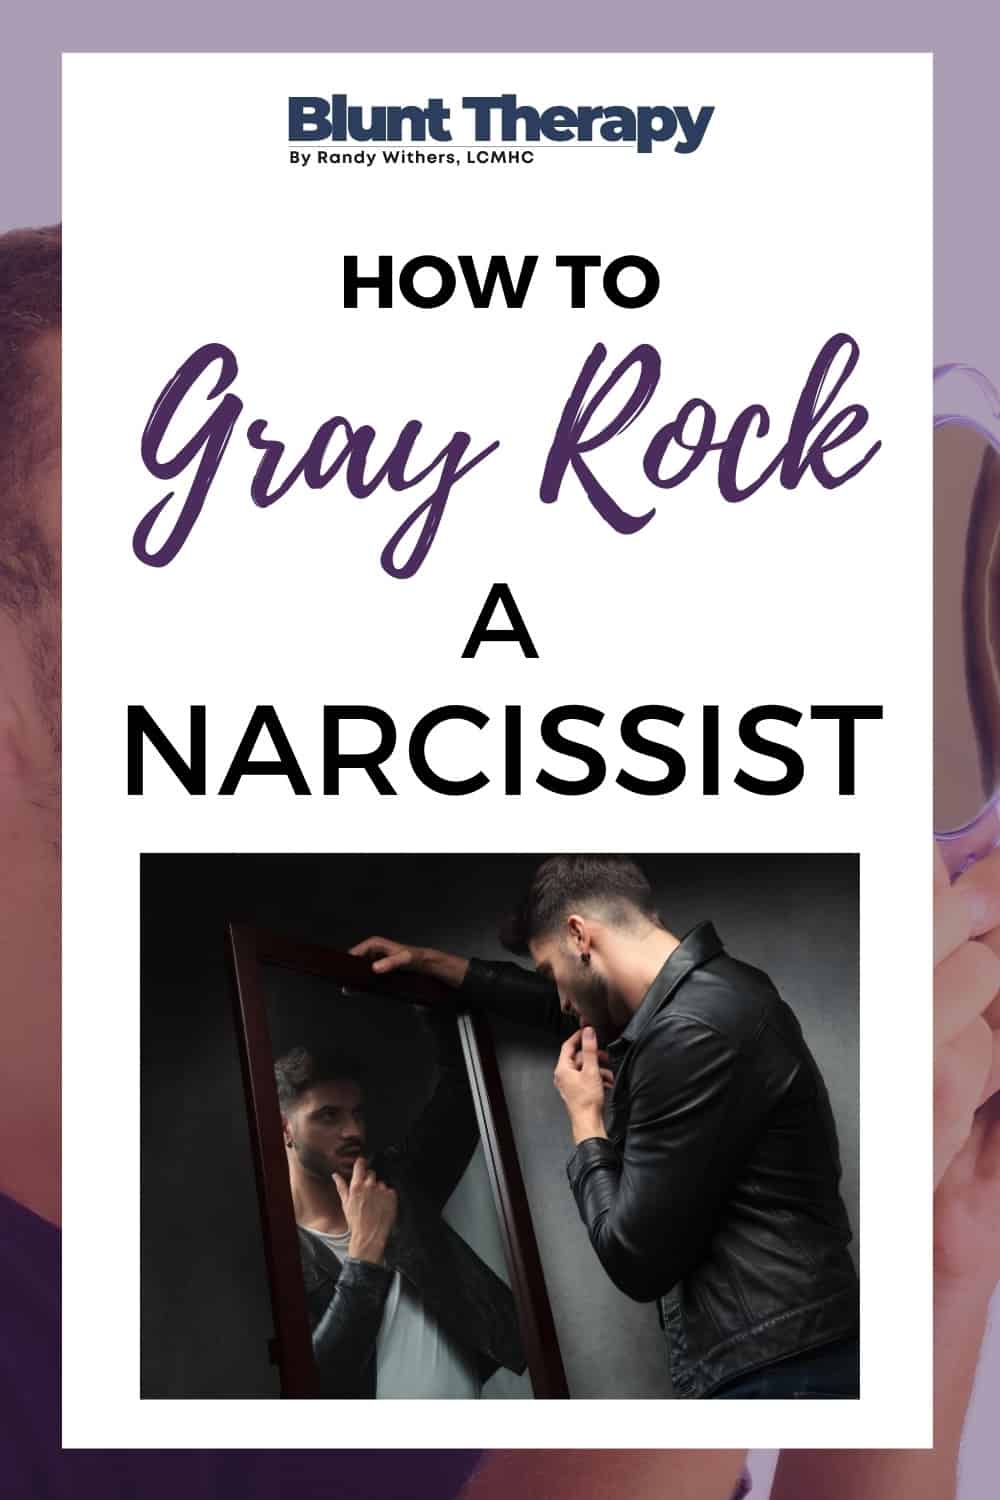 How To Use The Gray Rock Method To Deal With A Narcissist